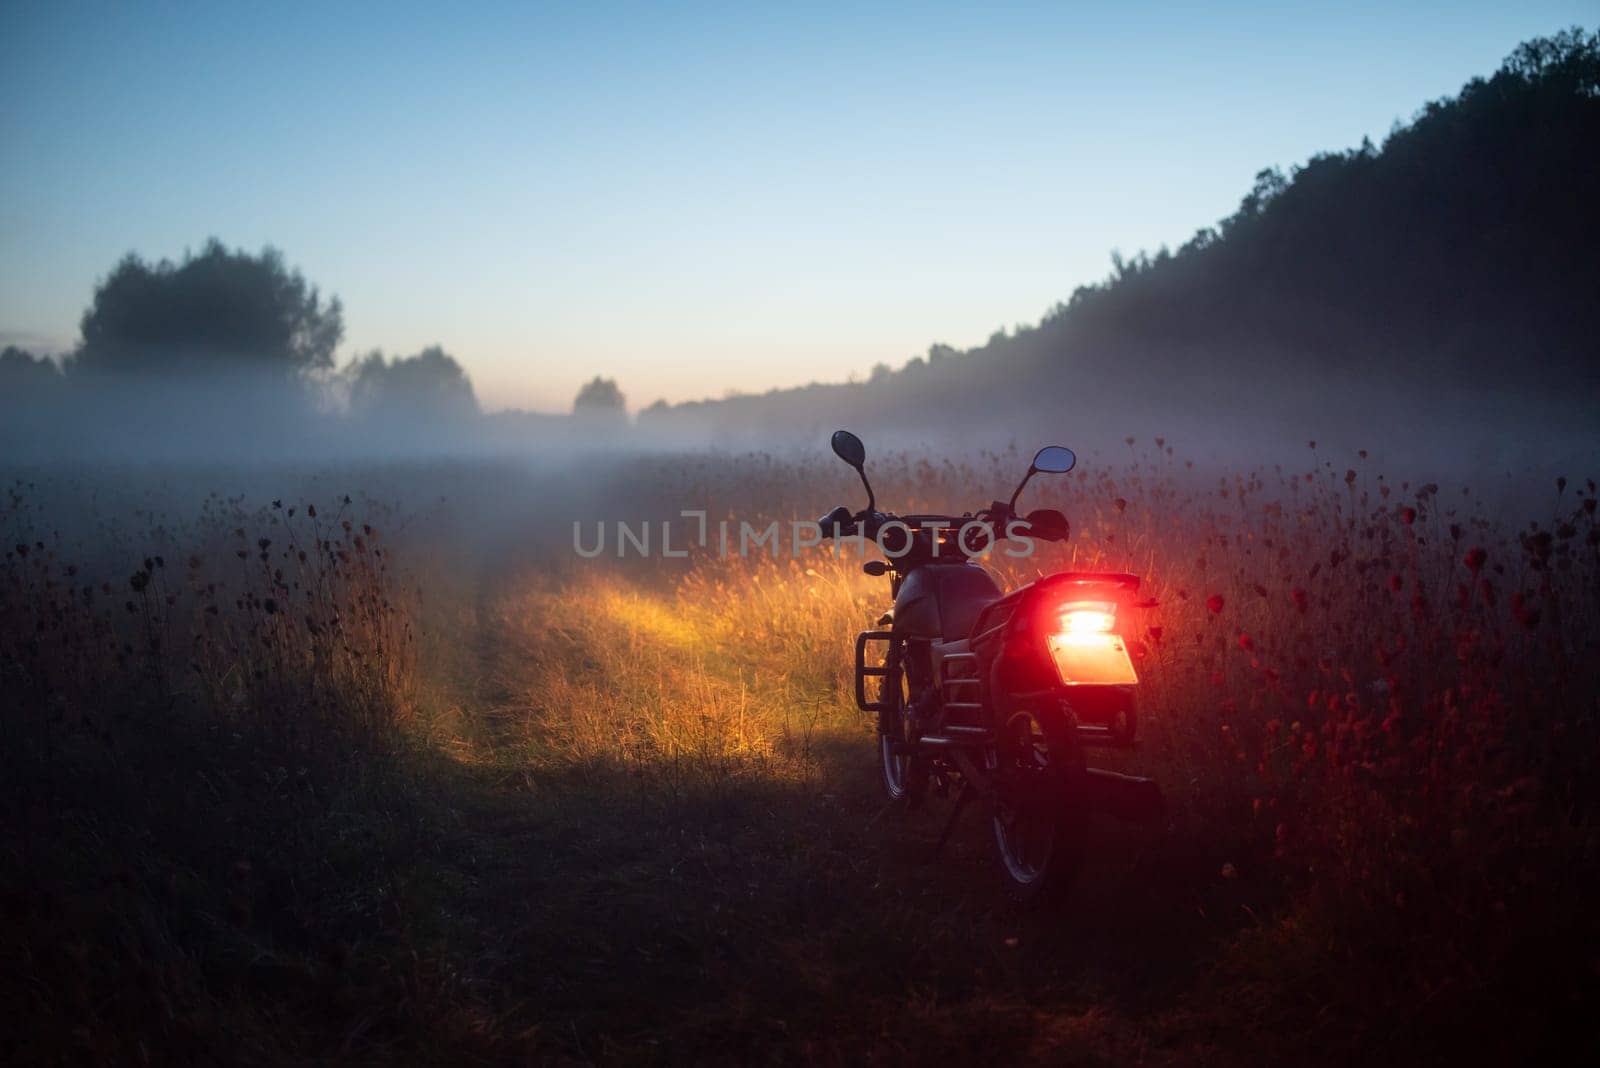 Motorcycle with its light on in the foggy field on a late evening by VitaliiPetrushenko